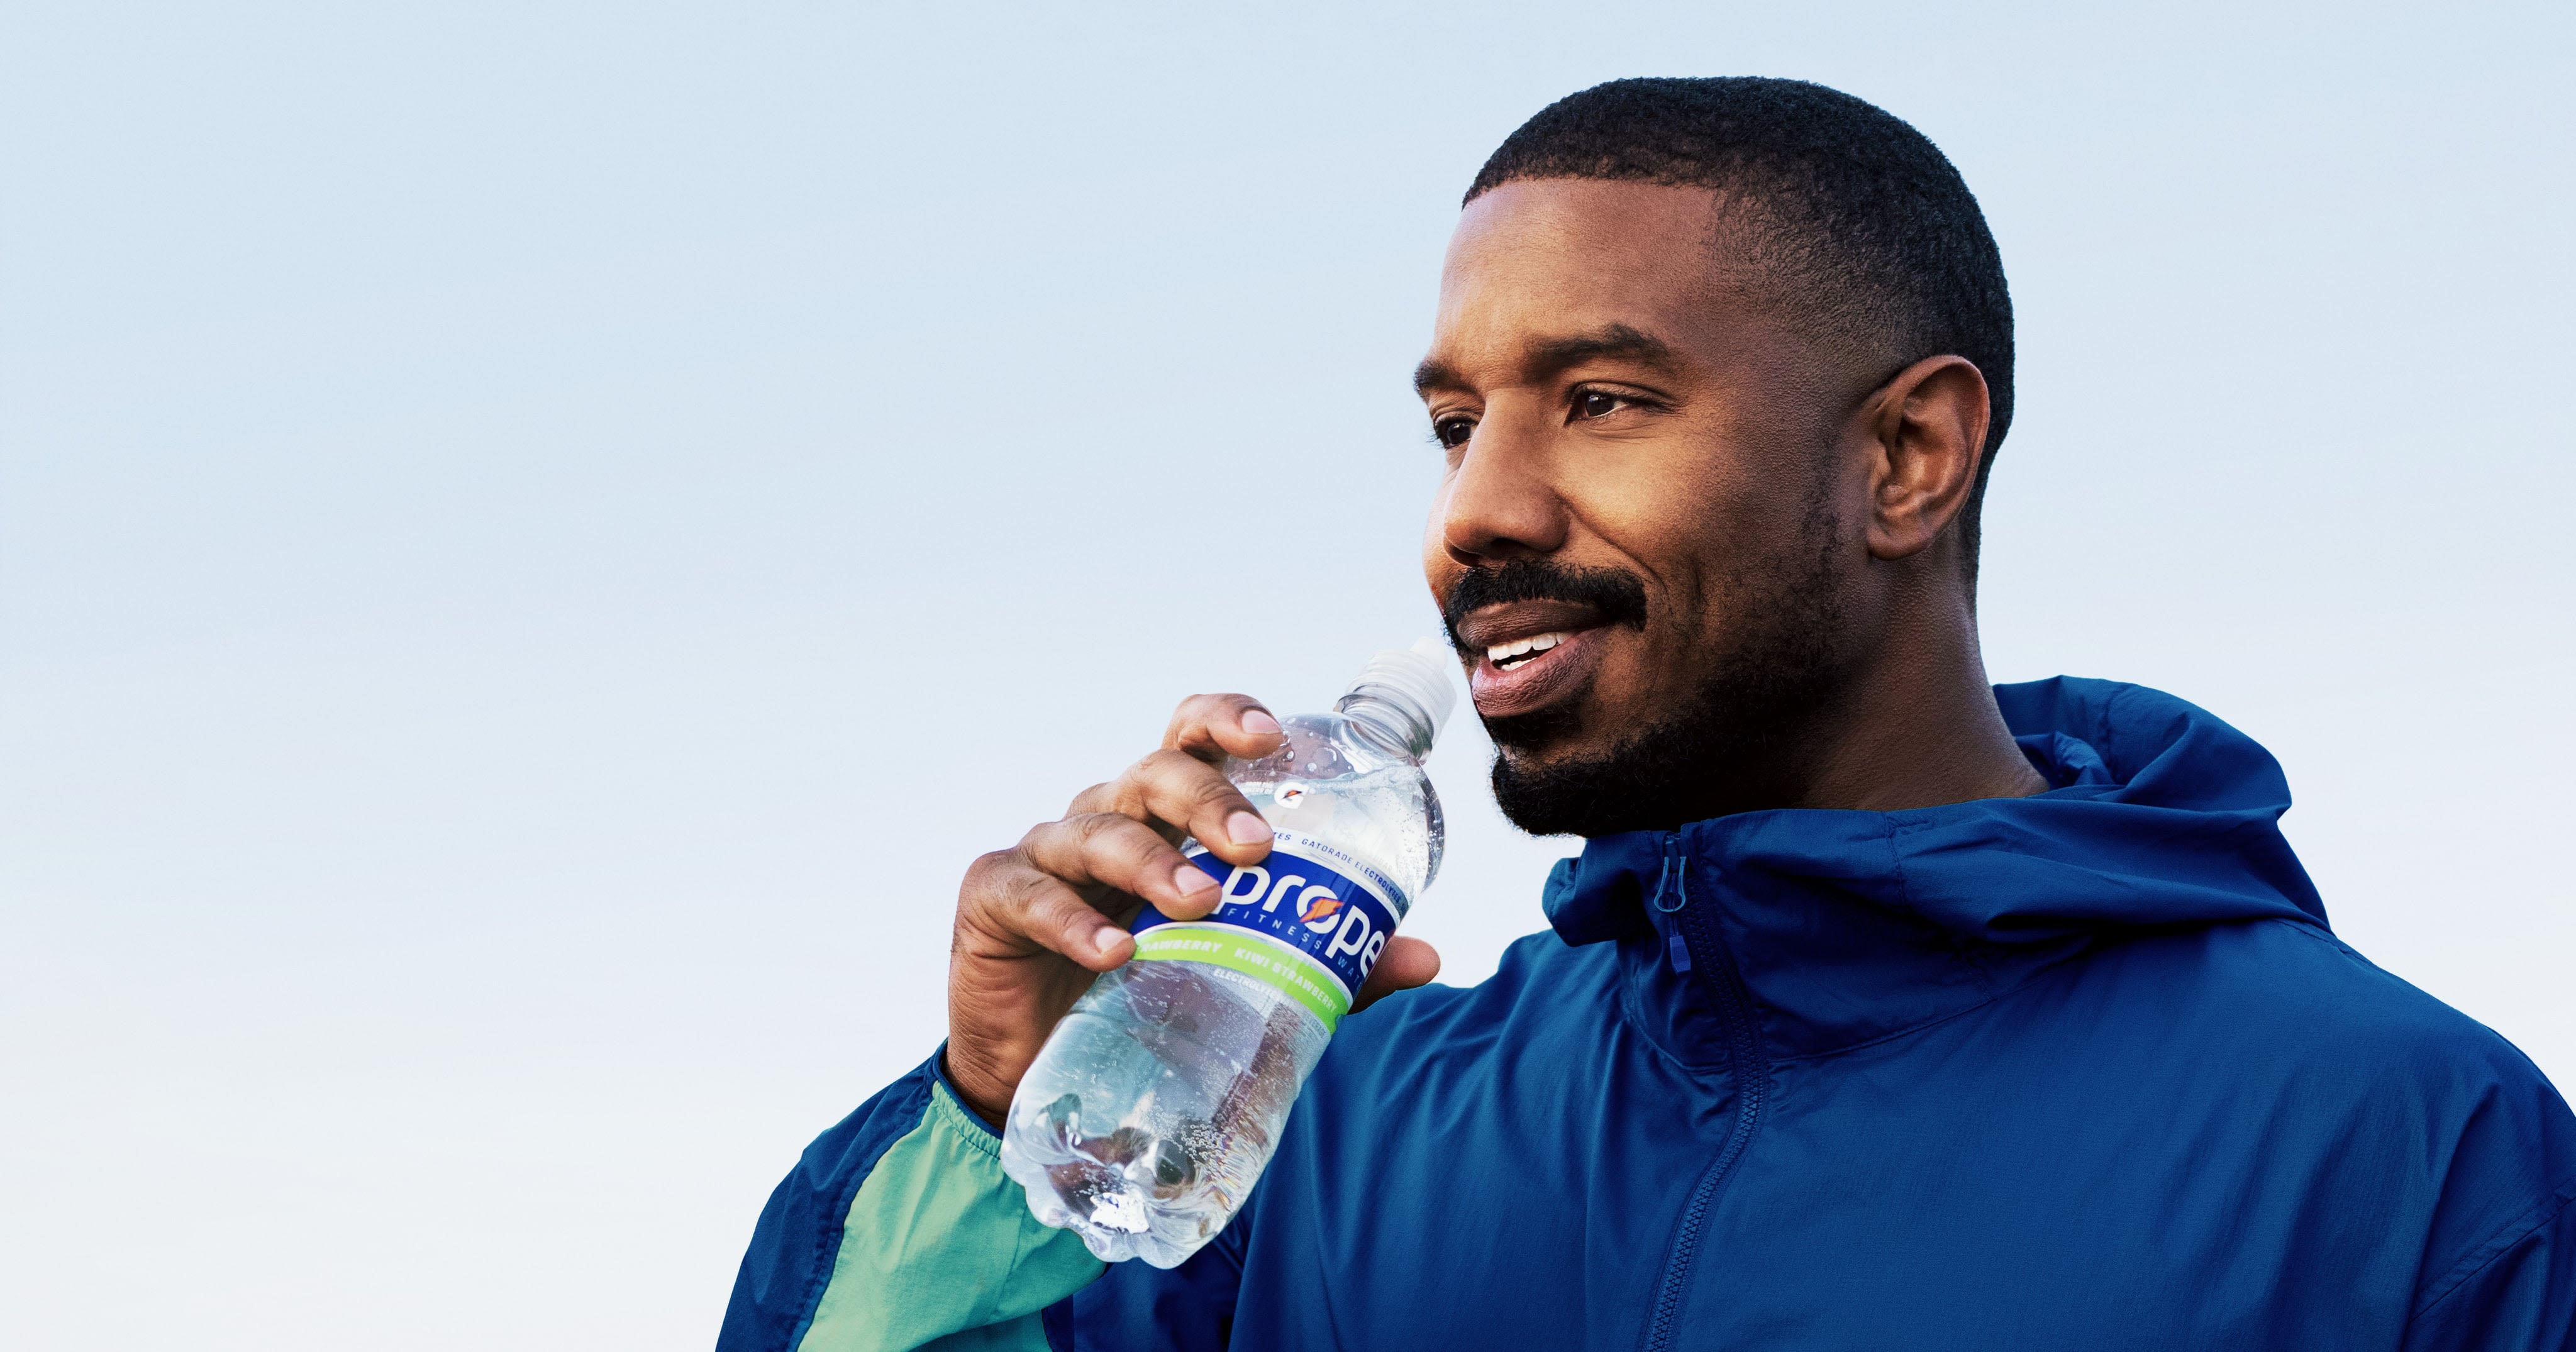 Michael B. Jordan Wants to Make It Easier For Everyone to Work Out